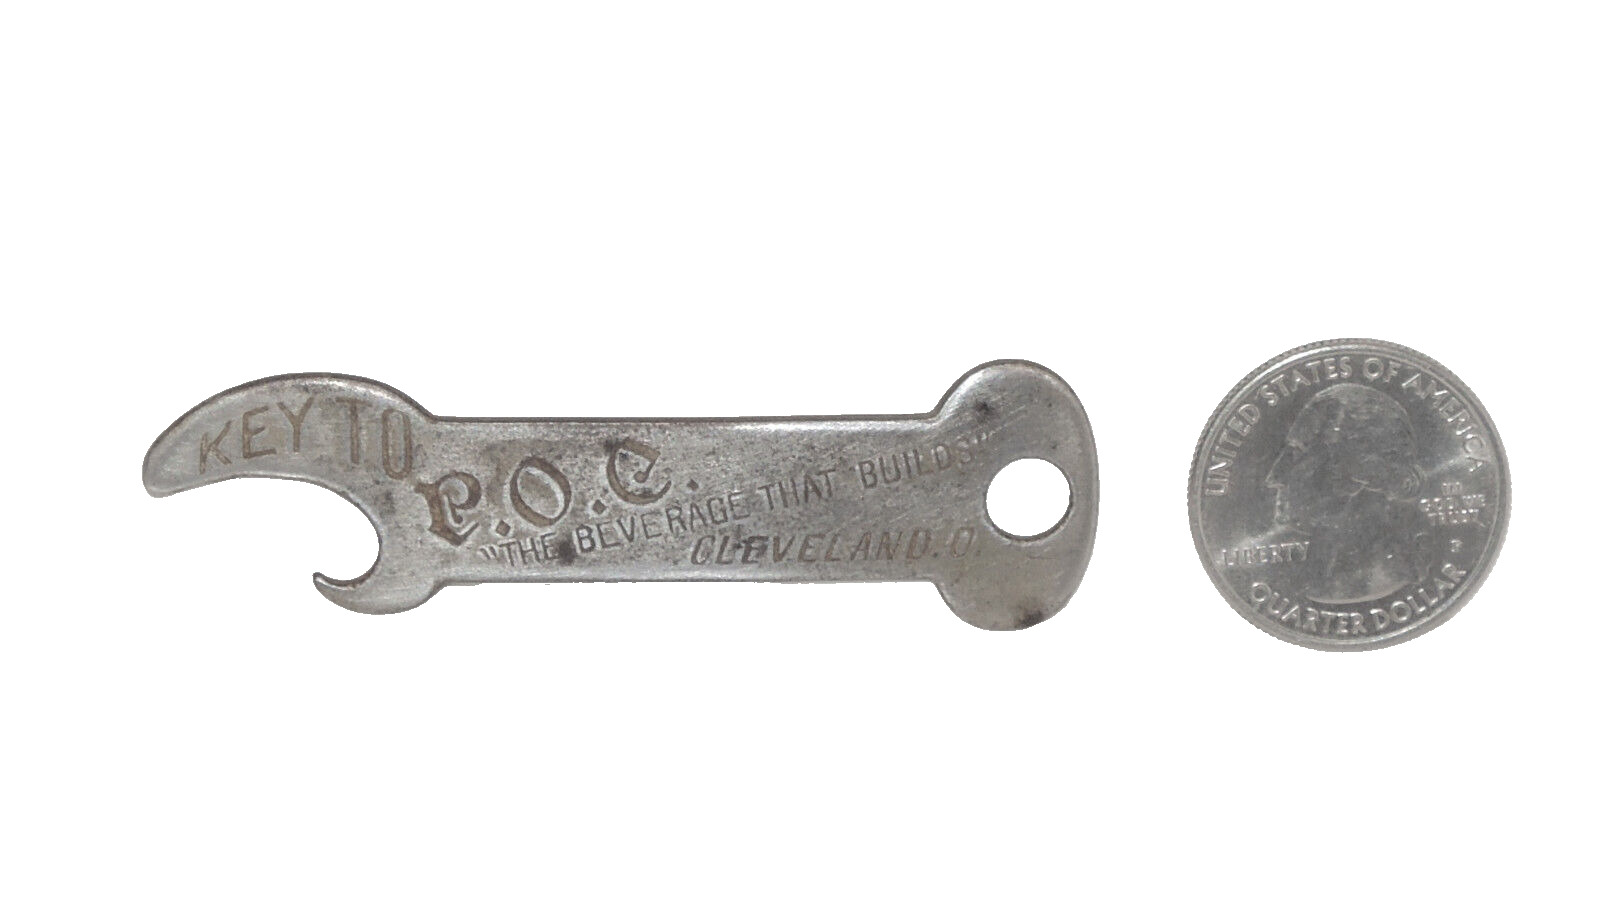 c.1914 Beer Bottle Opener ~ KEY TO P.O.C. CLEVELAND, OH~THE BEVERAGE THAT BUILDS